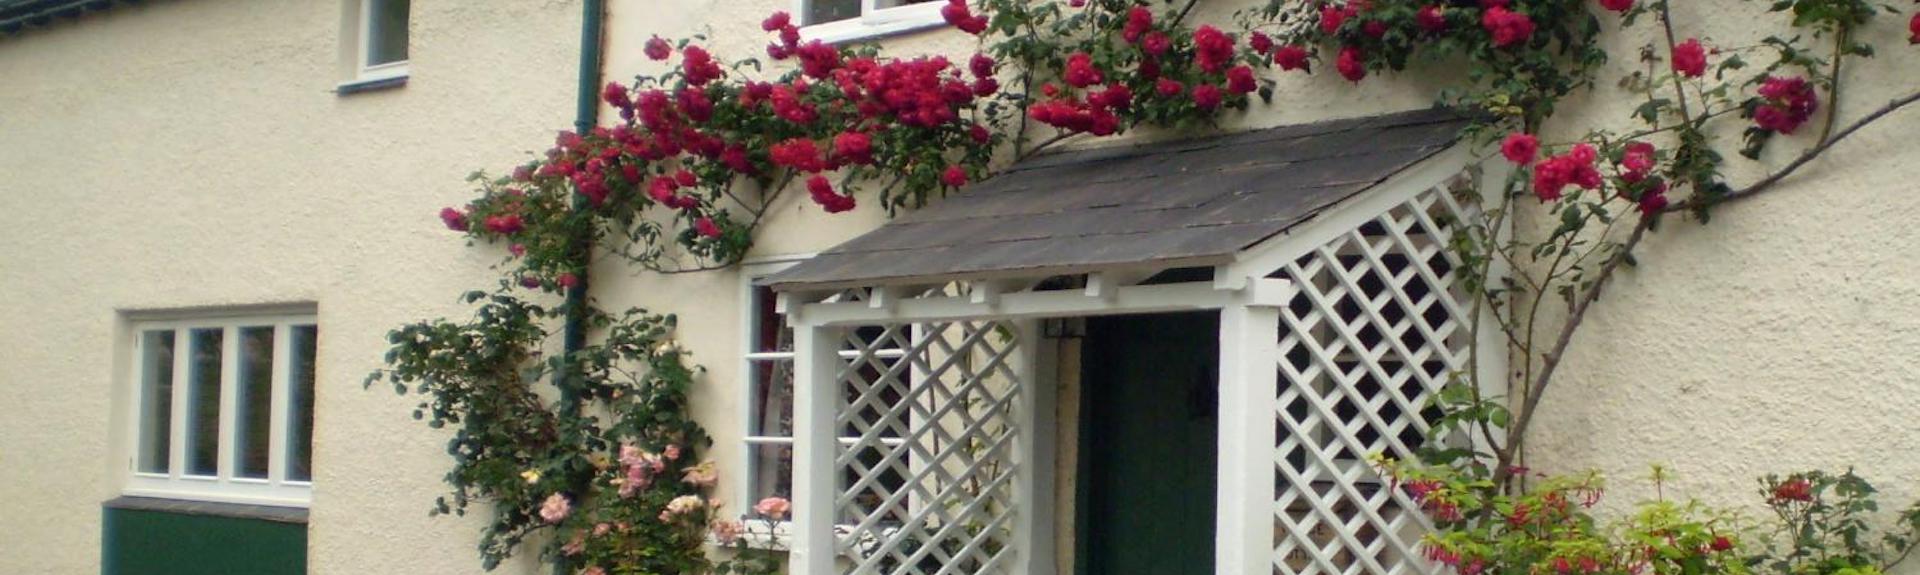 Climbing roses surround the porch of a country cottage in Somerset.